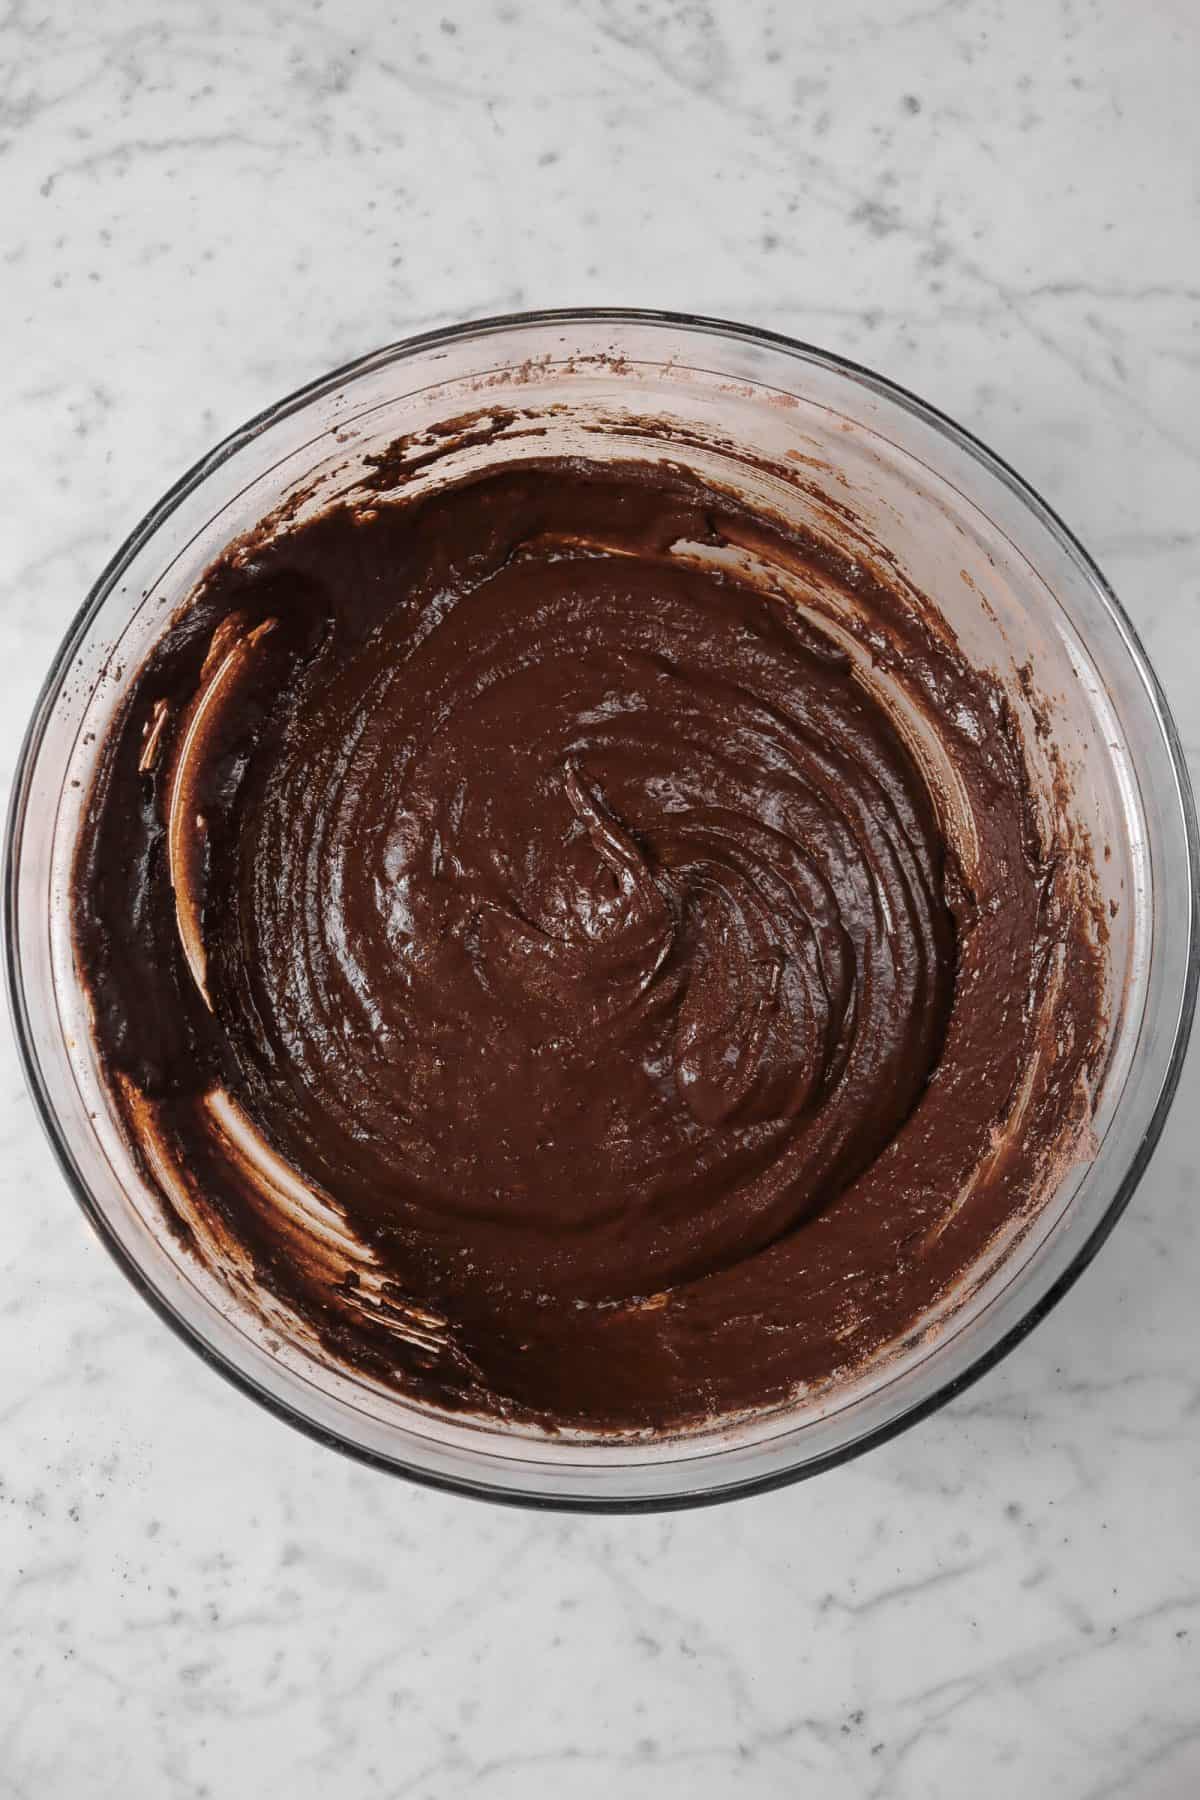 vegan chocolate muffins batter in a glass bowl